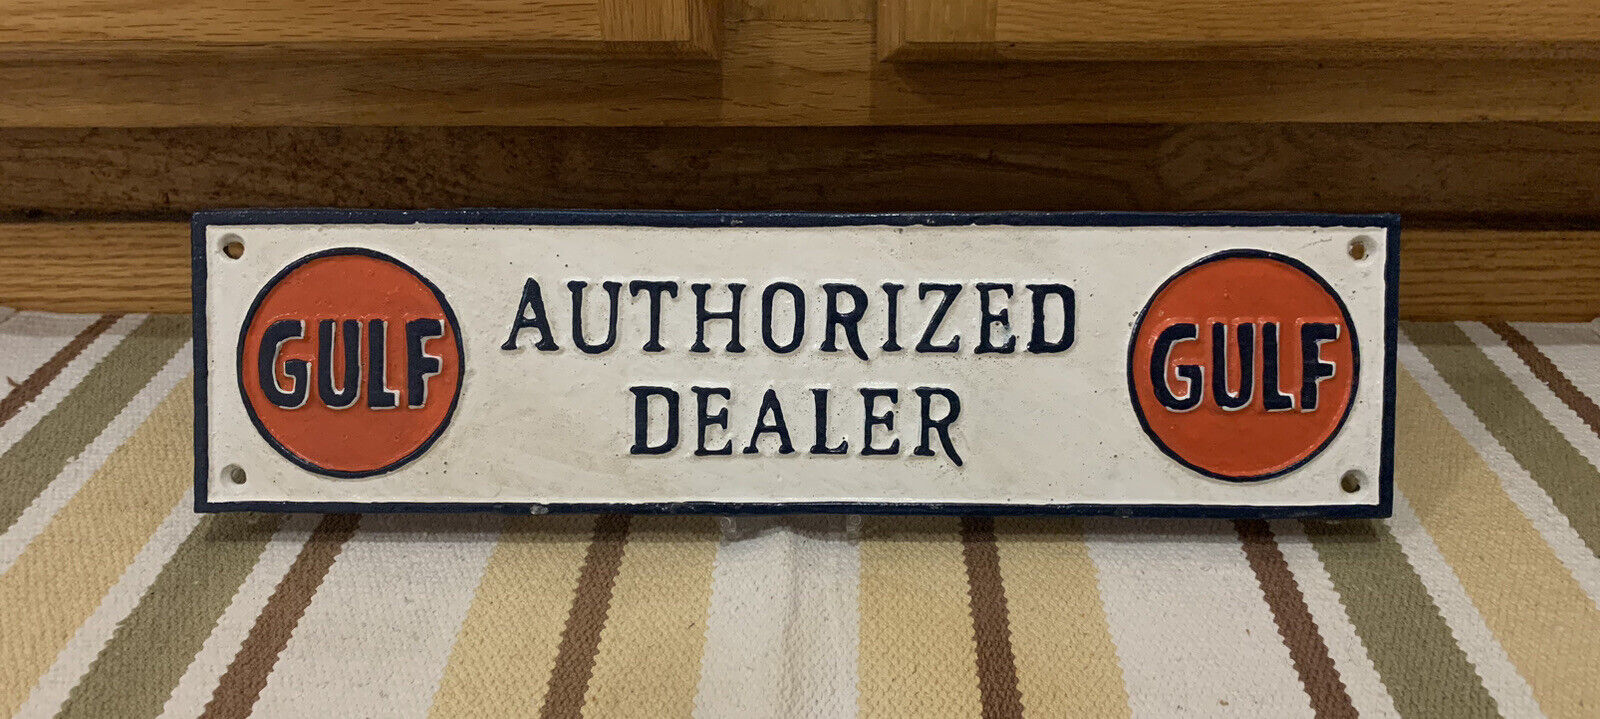 Gulf Authorized Dealer Cast Iron Sign Gas Oil Garage Vintage Style Wall Decor